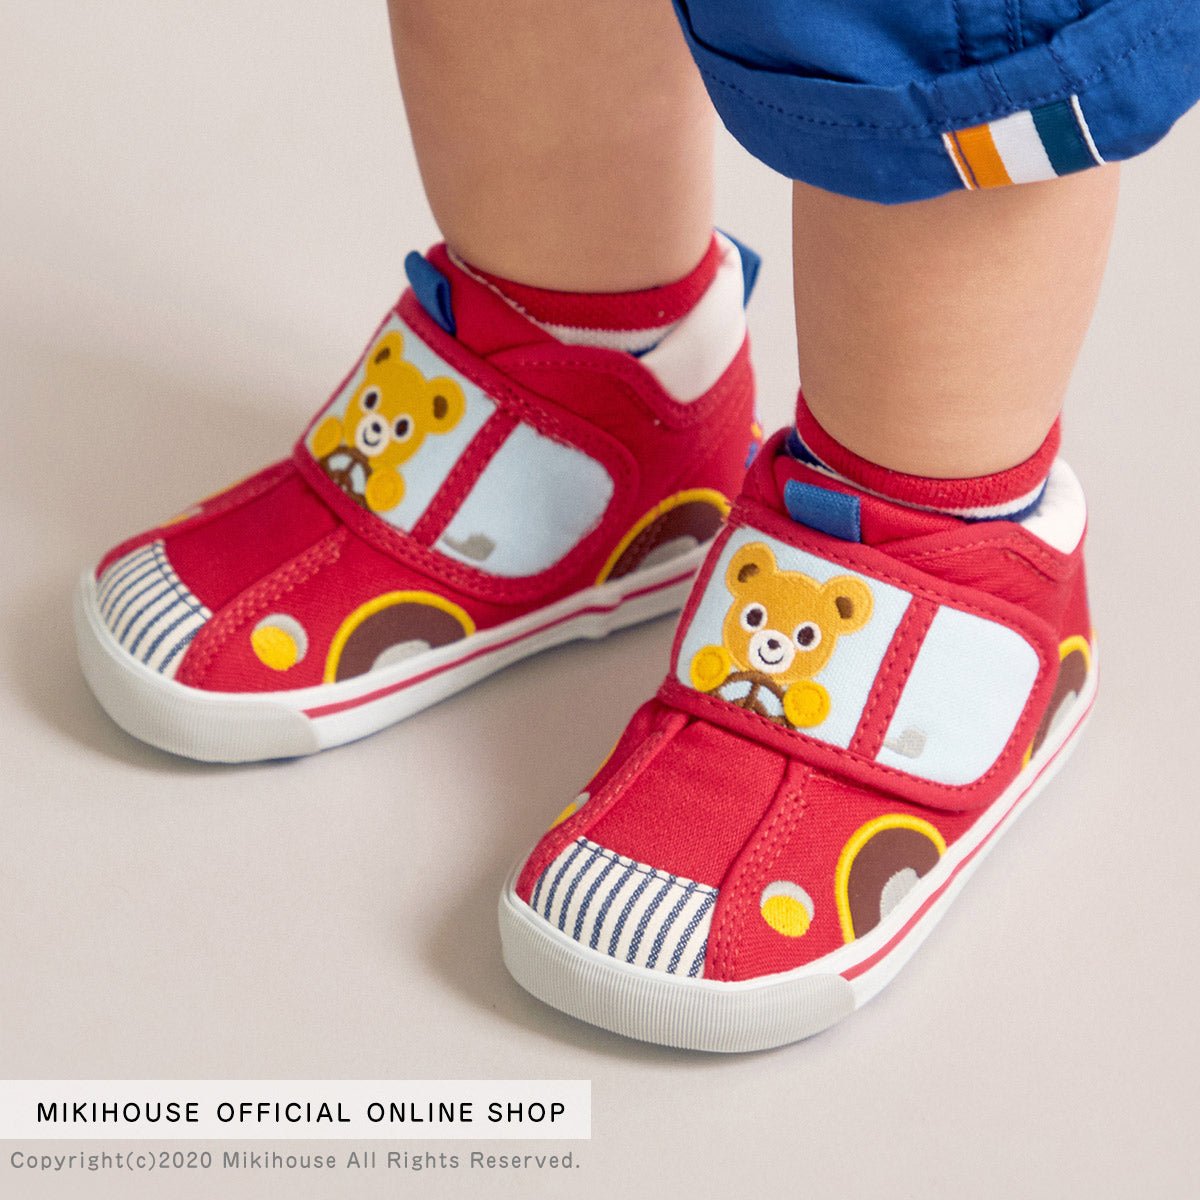 Driving Bear Second Shoes - 11-9303-825-02-13